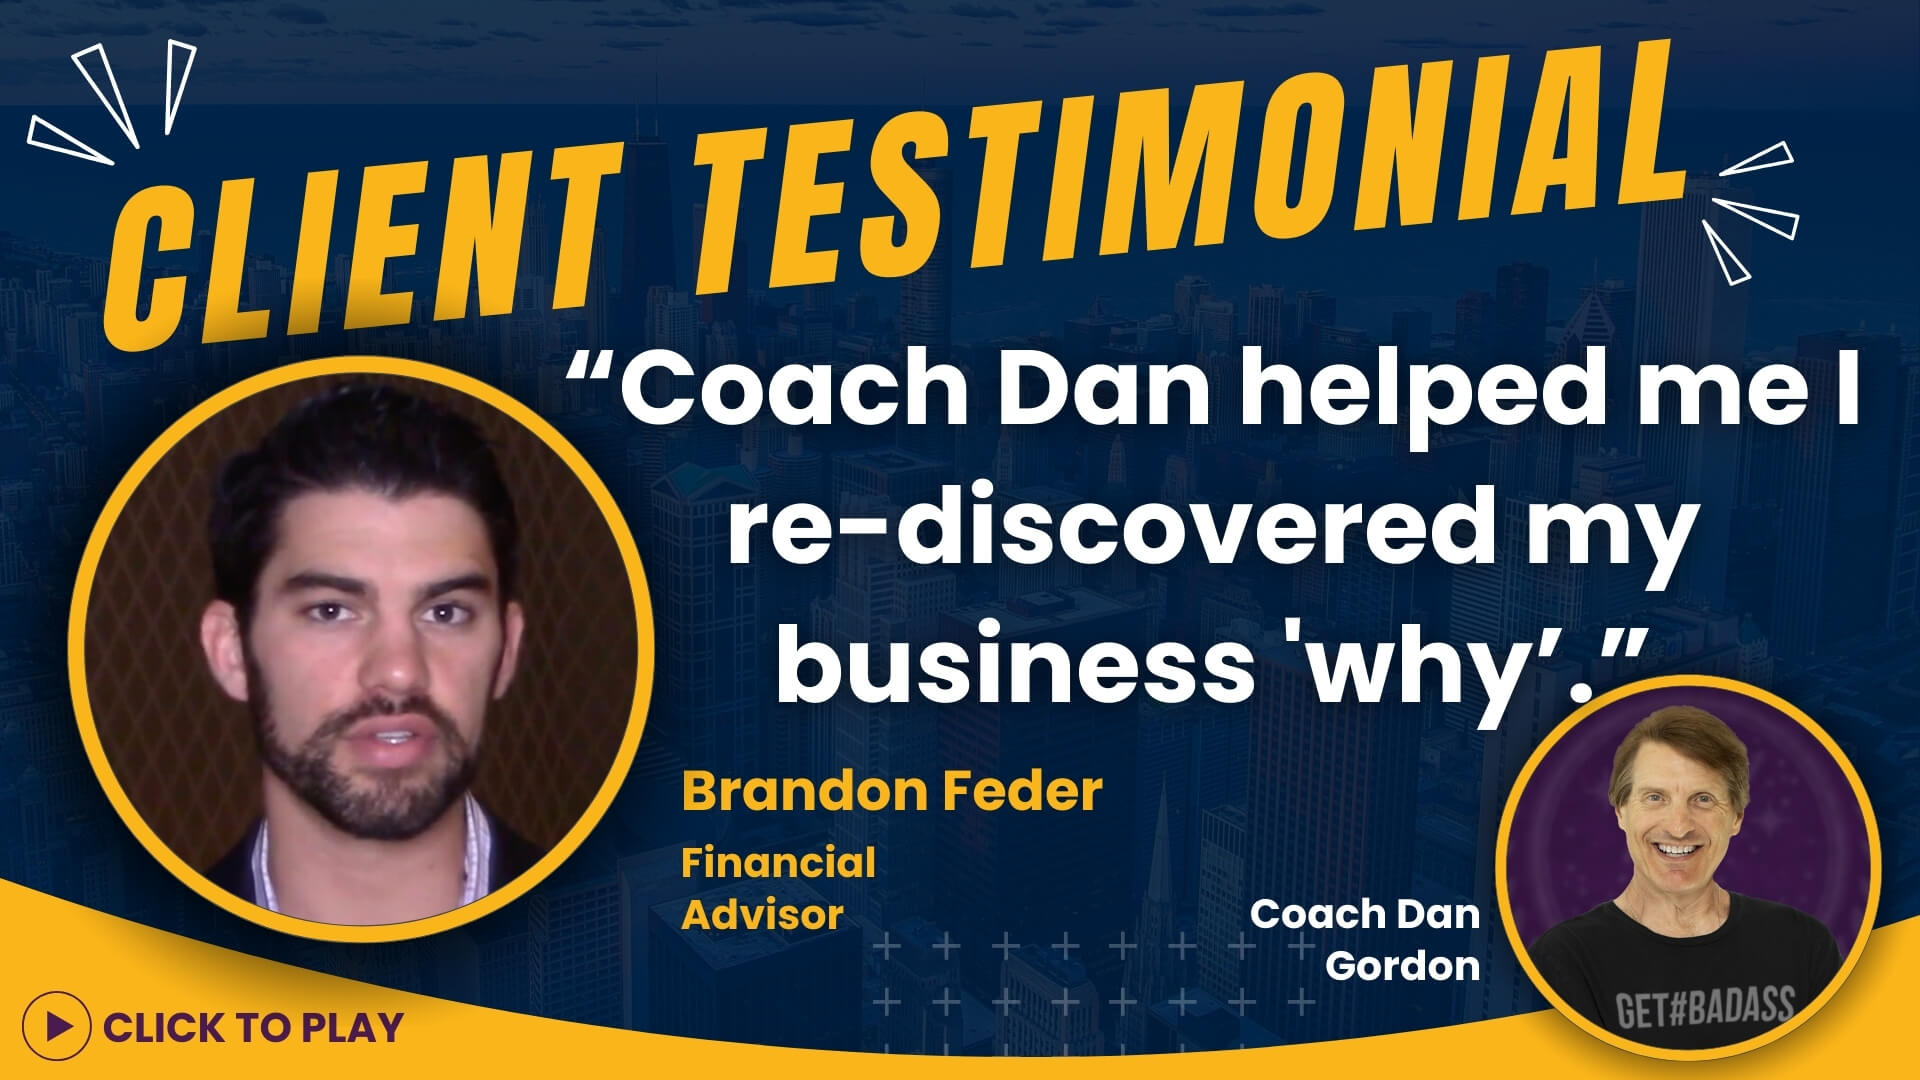 Financial Advisor Brandon Feder shares his testimonial about Coach Dan Gordon's role in rediscovering his business 'why', with a prominent 'Click to Play' video button.